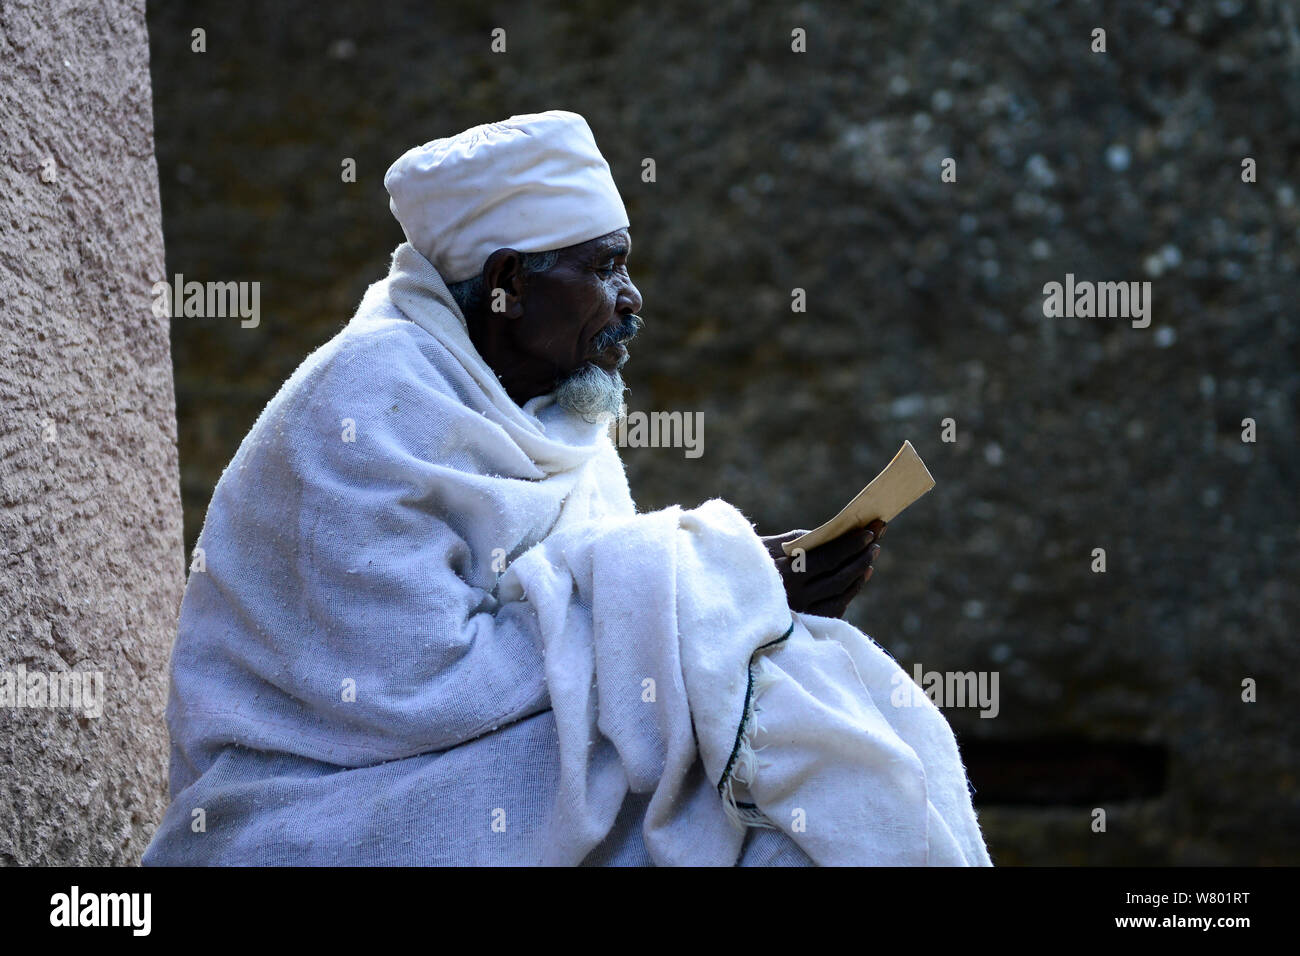 Devout Christian in traditional robes studying at Bet Medhane Alem (part of the northwestern group of churches in Lalibela). UNESCO World Heritage Site. Lalibela. Ethiopia, December 2014. Stock Photo